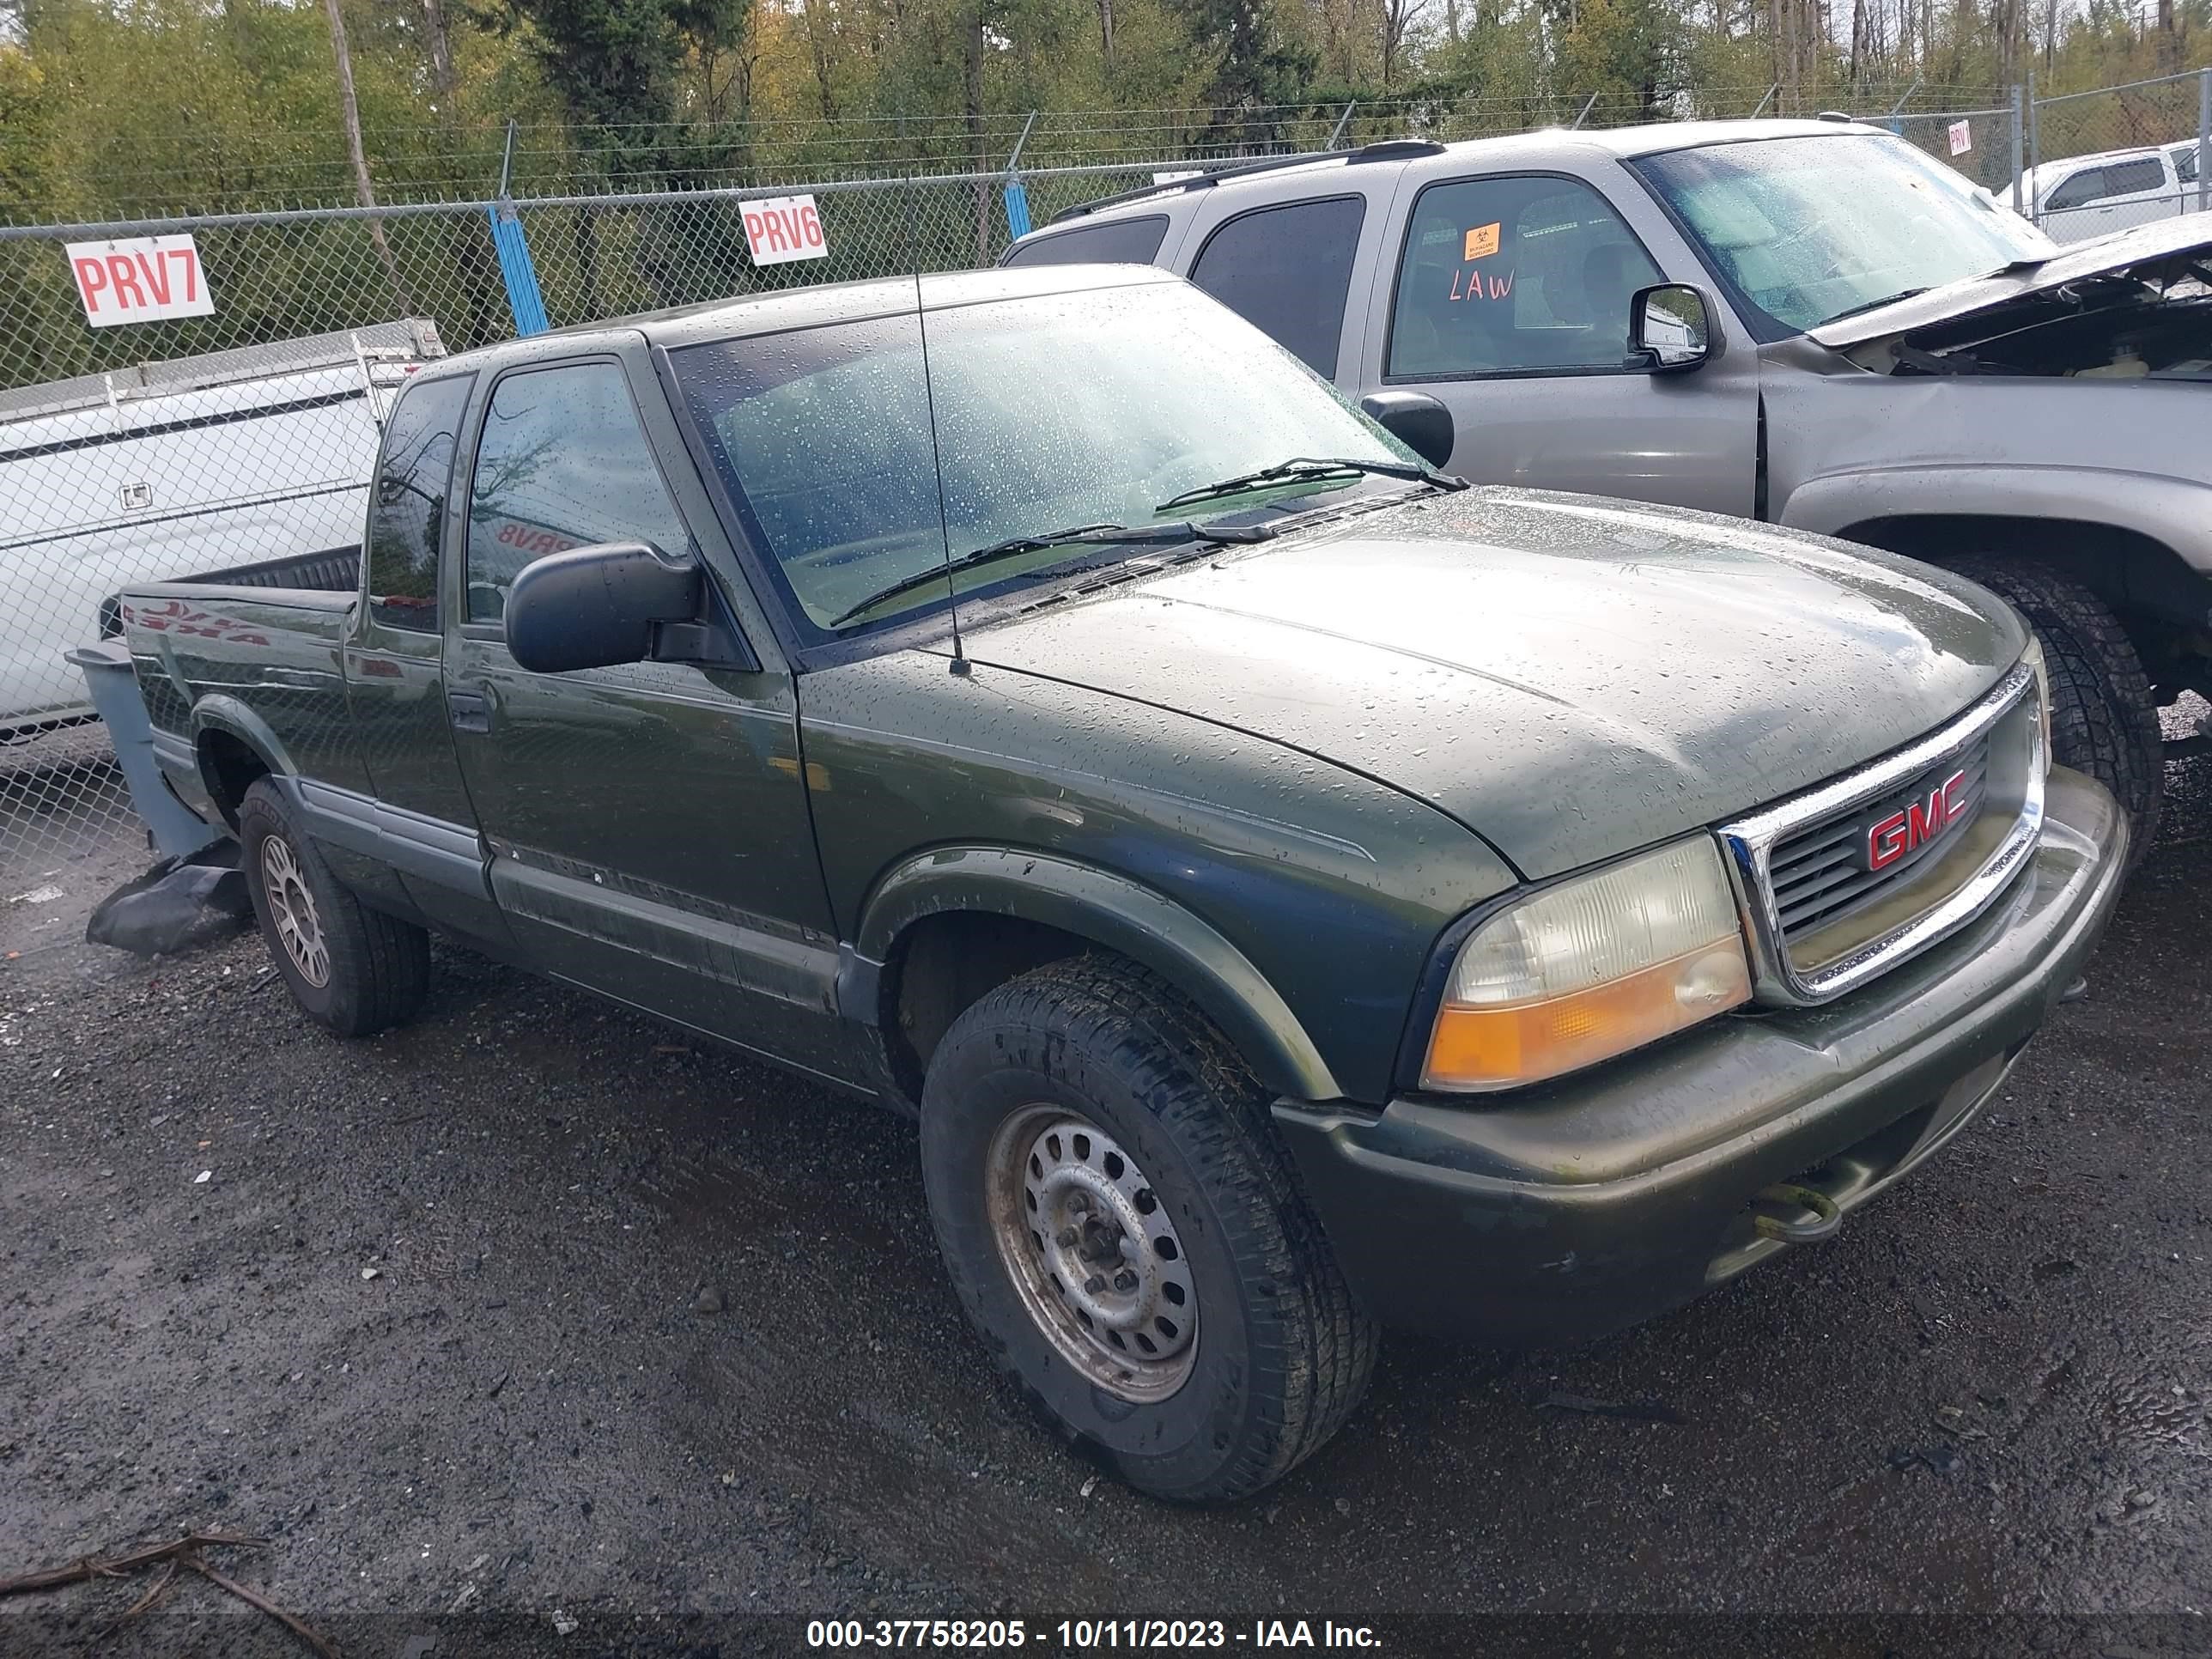 vin: 1GTDT19W8Y8259192 1GTDT19W8Y8259192 2000 gmc sonoma 4300 for Sale in 98374, 15801 110Th Ave E, Puyallup, USA